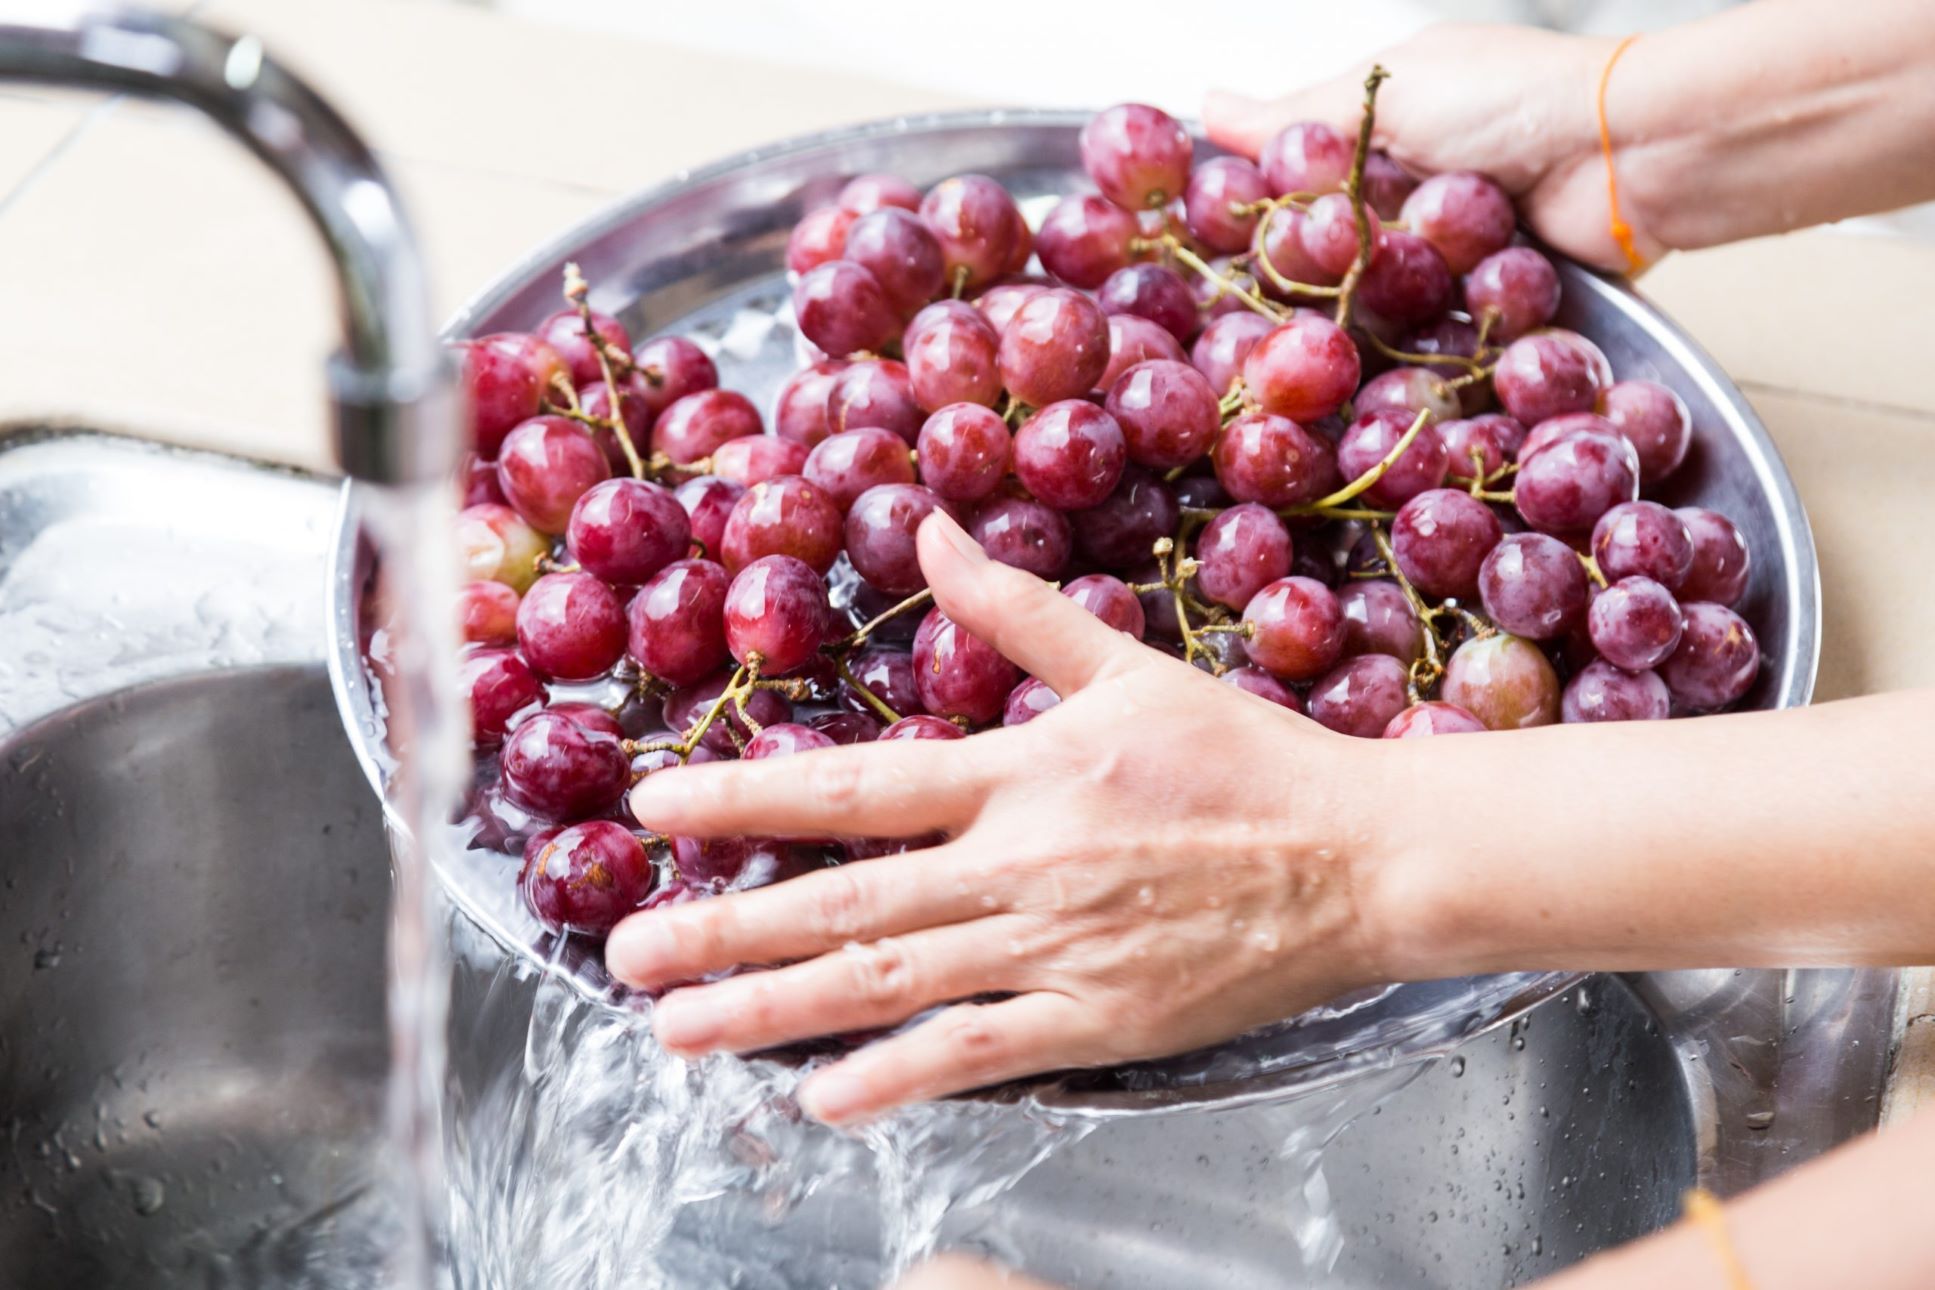 How To Store Washed Grapes